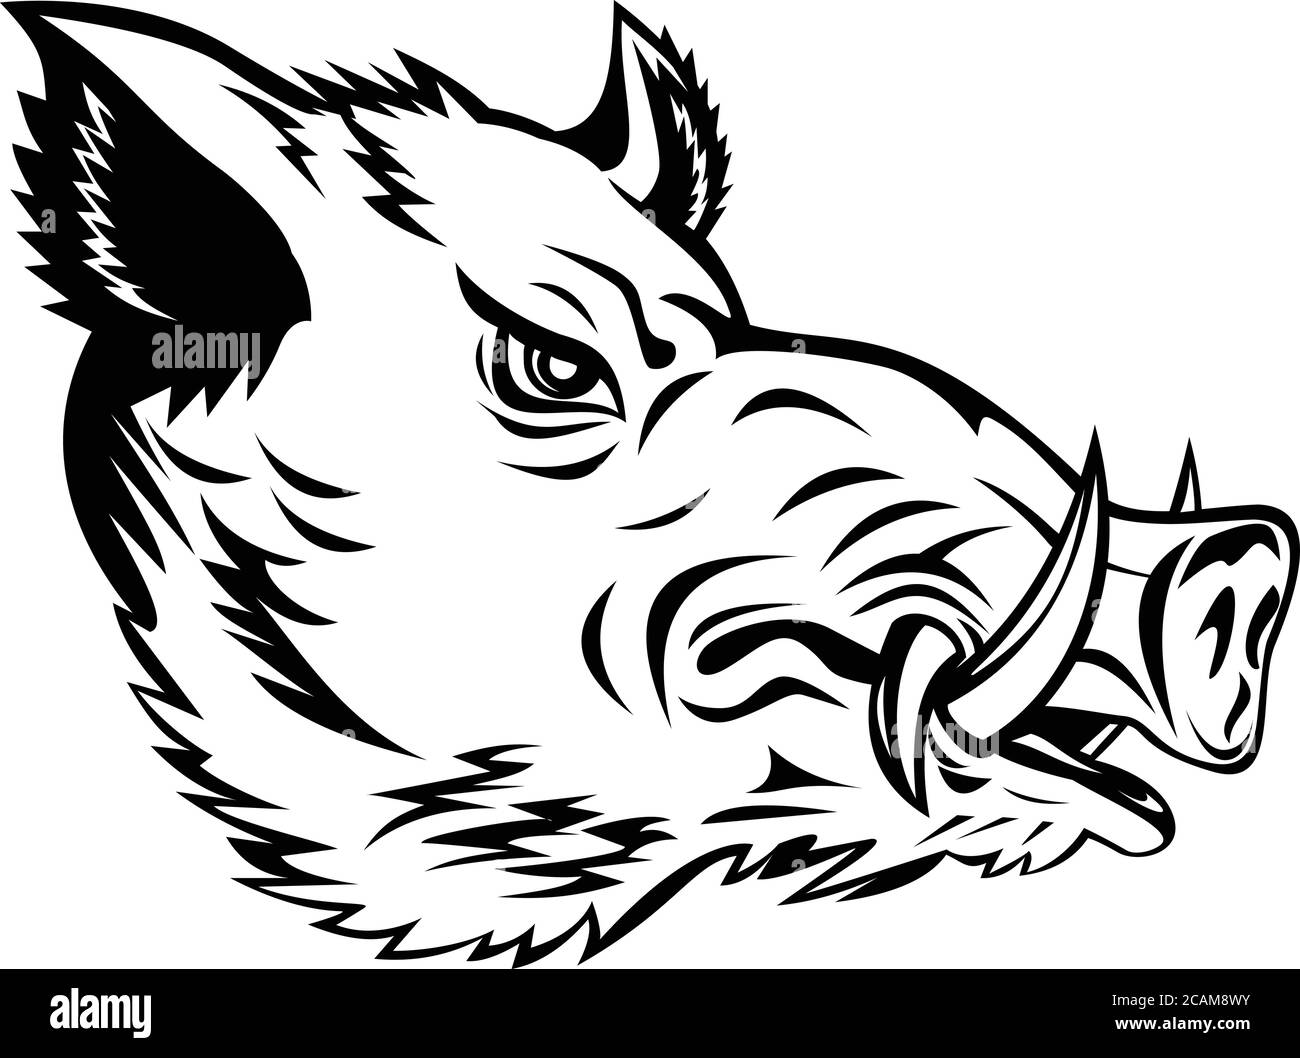 Mascot illustration of head of a wild boar, Sus scrofa, wild swine, common wild pig, a suid native to the Palearctic viewed from side on isolated back Stock Vector